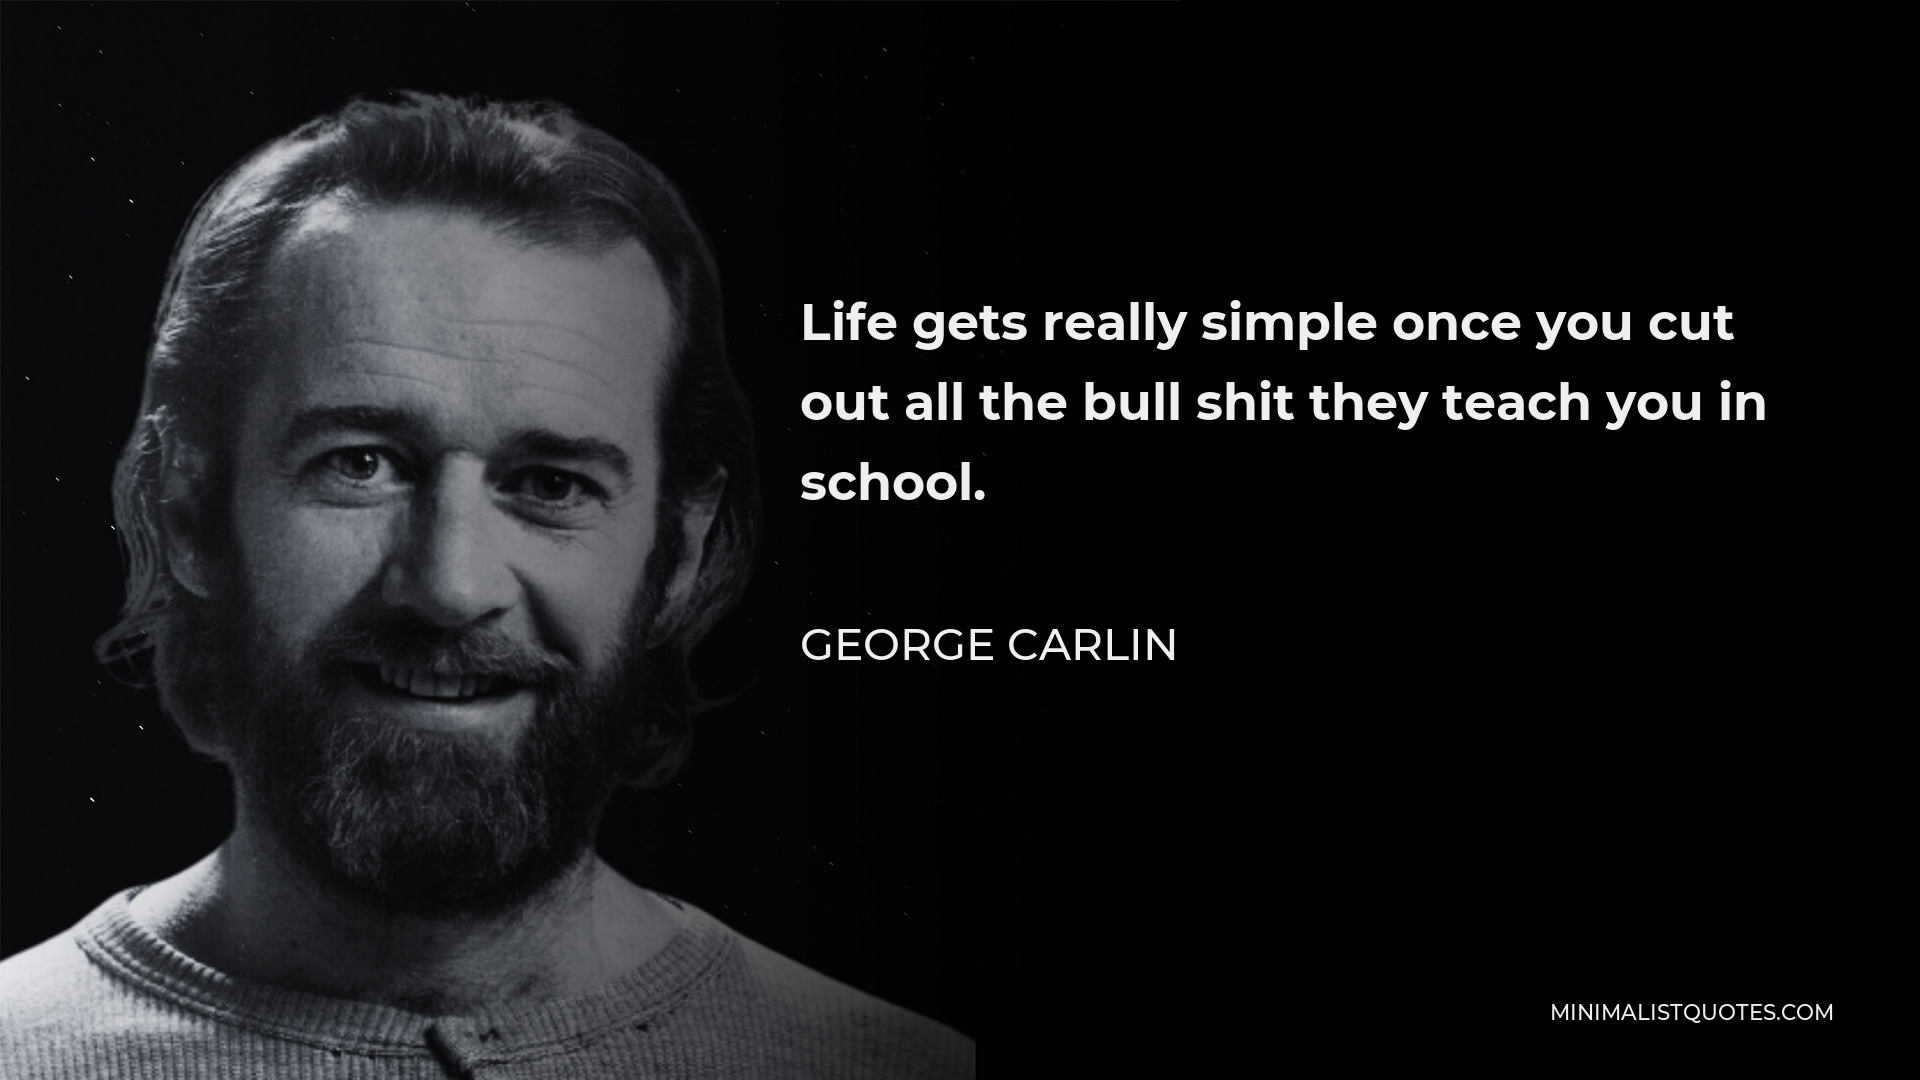 George Carlin Quote - Life gets really simple once you cut out all the bull shit they teach you in school.